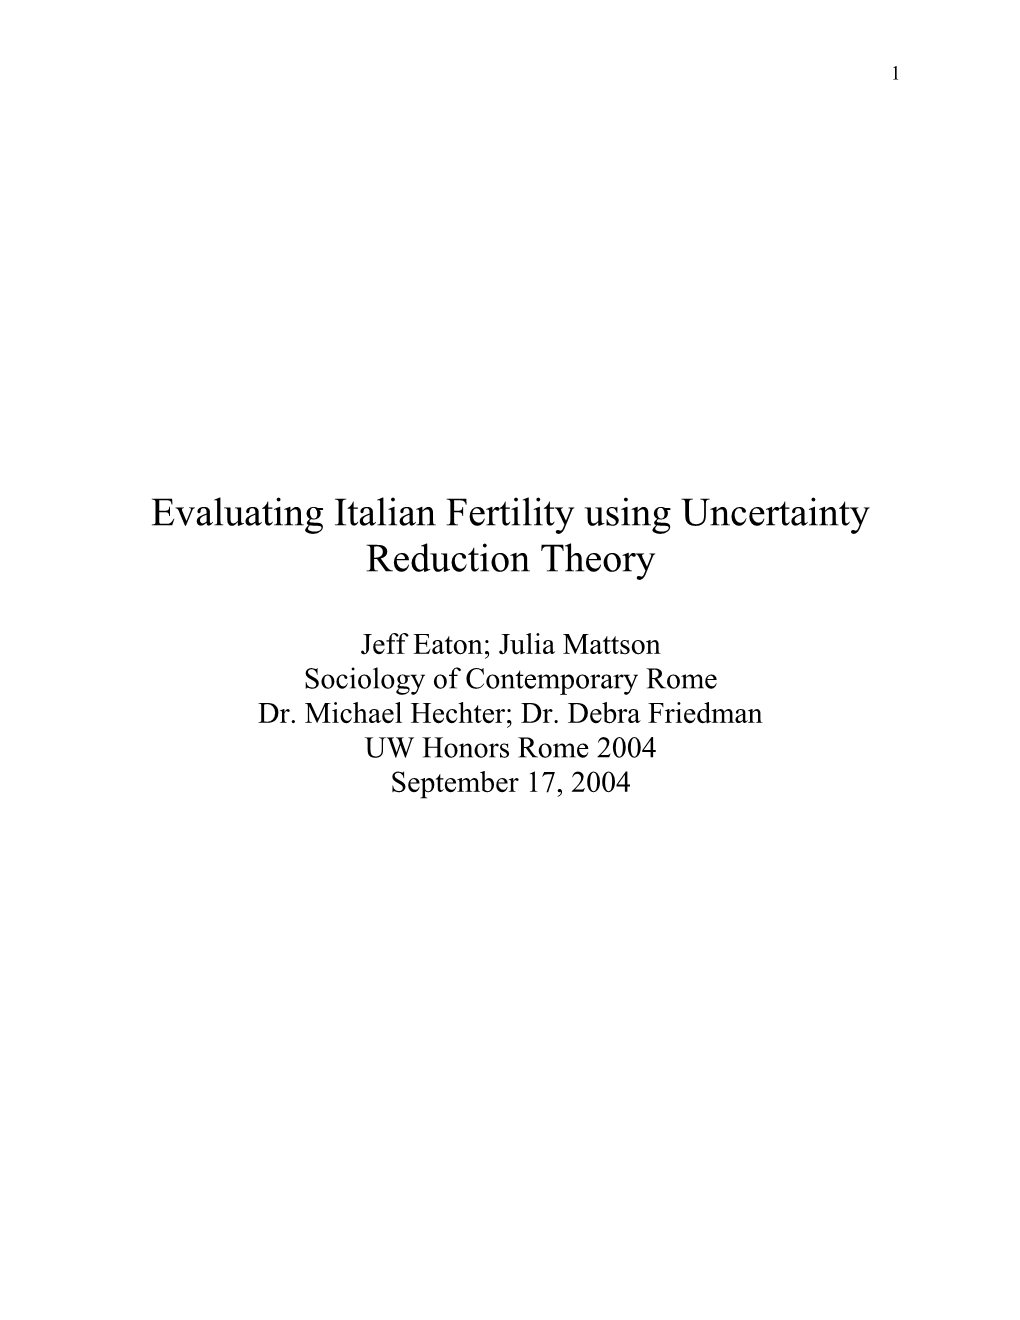 Explanations of Italian Fertility Using Uncertainty Reduction Theory